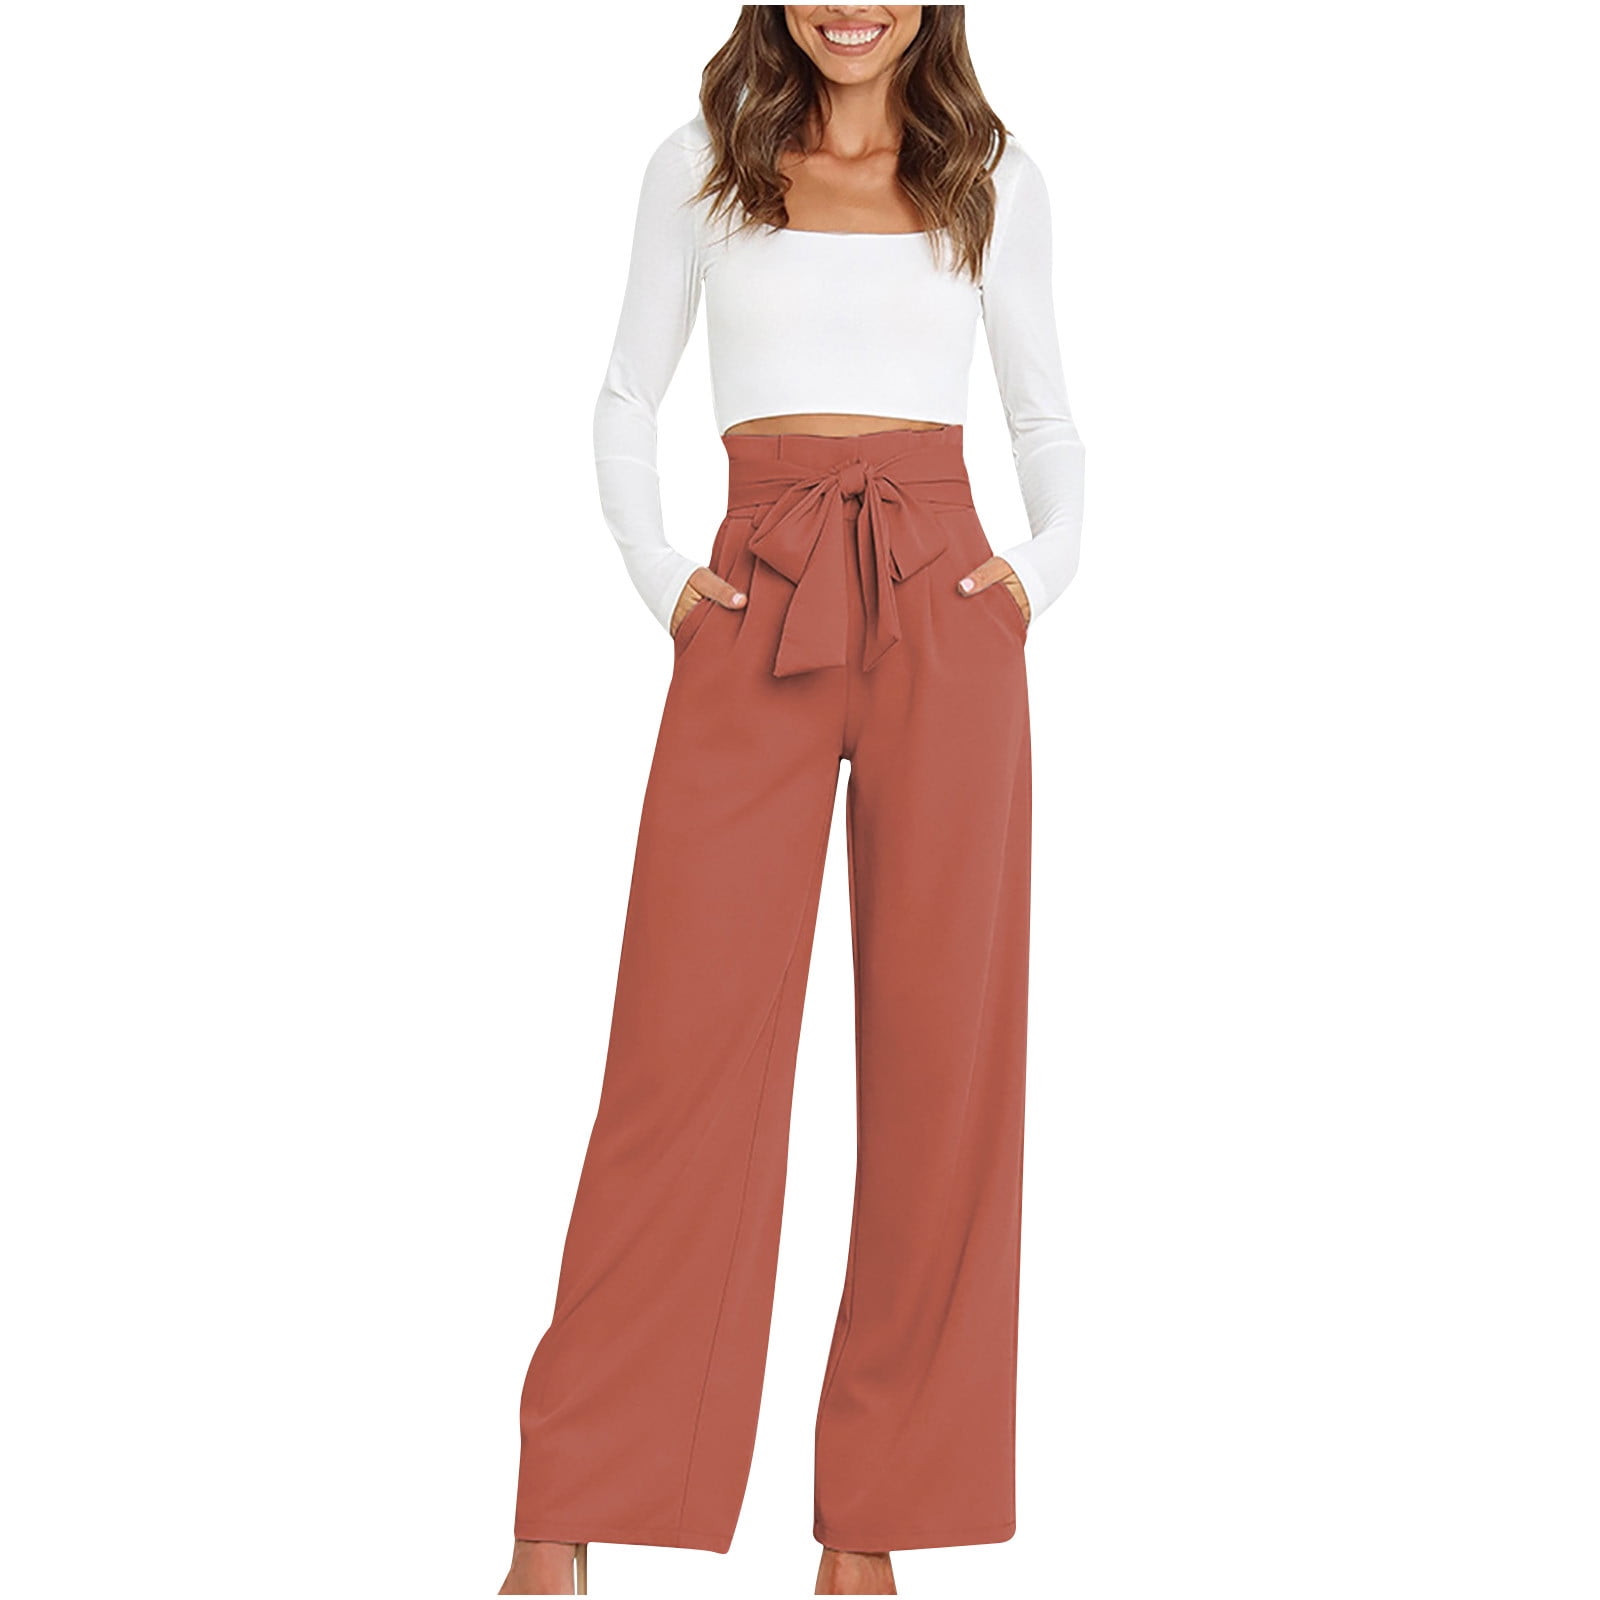 RYRJJ Straight Wide Leg Long Trousers with Tie Belt for Women Pleated Front  High Waisted Business Work Pants Elegant Dress Trousers(Orange,M) 